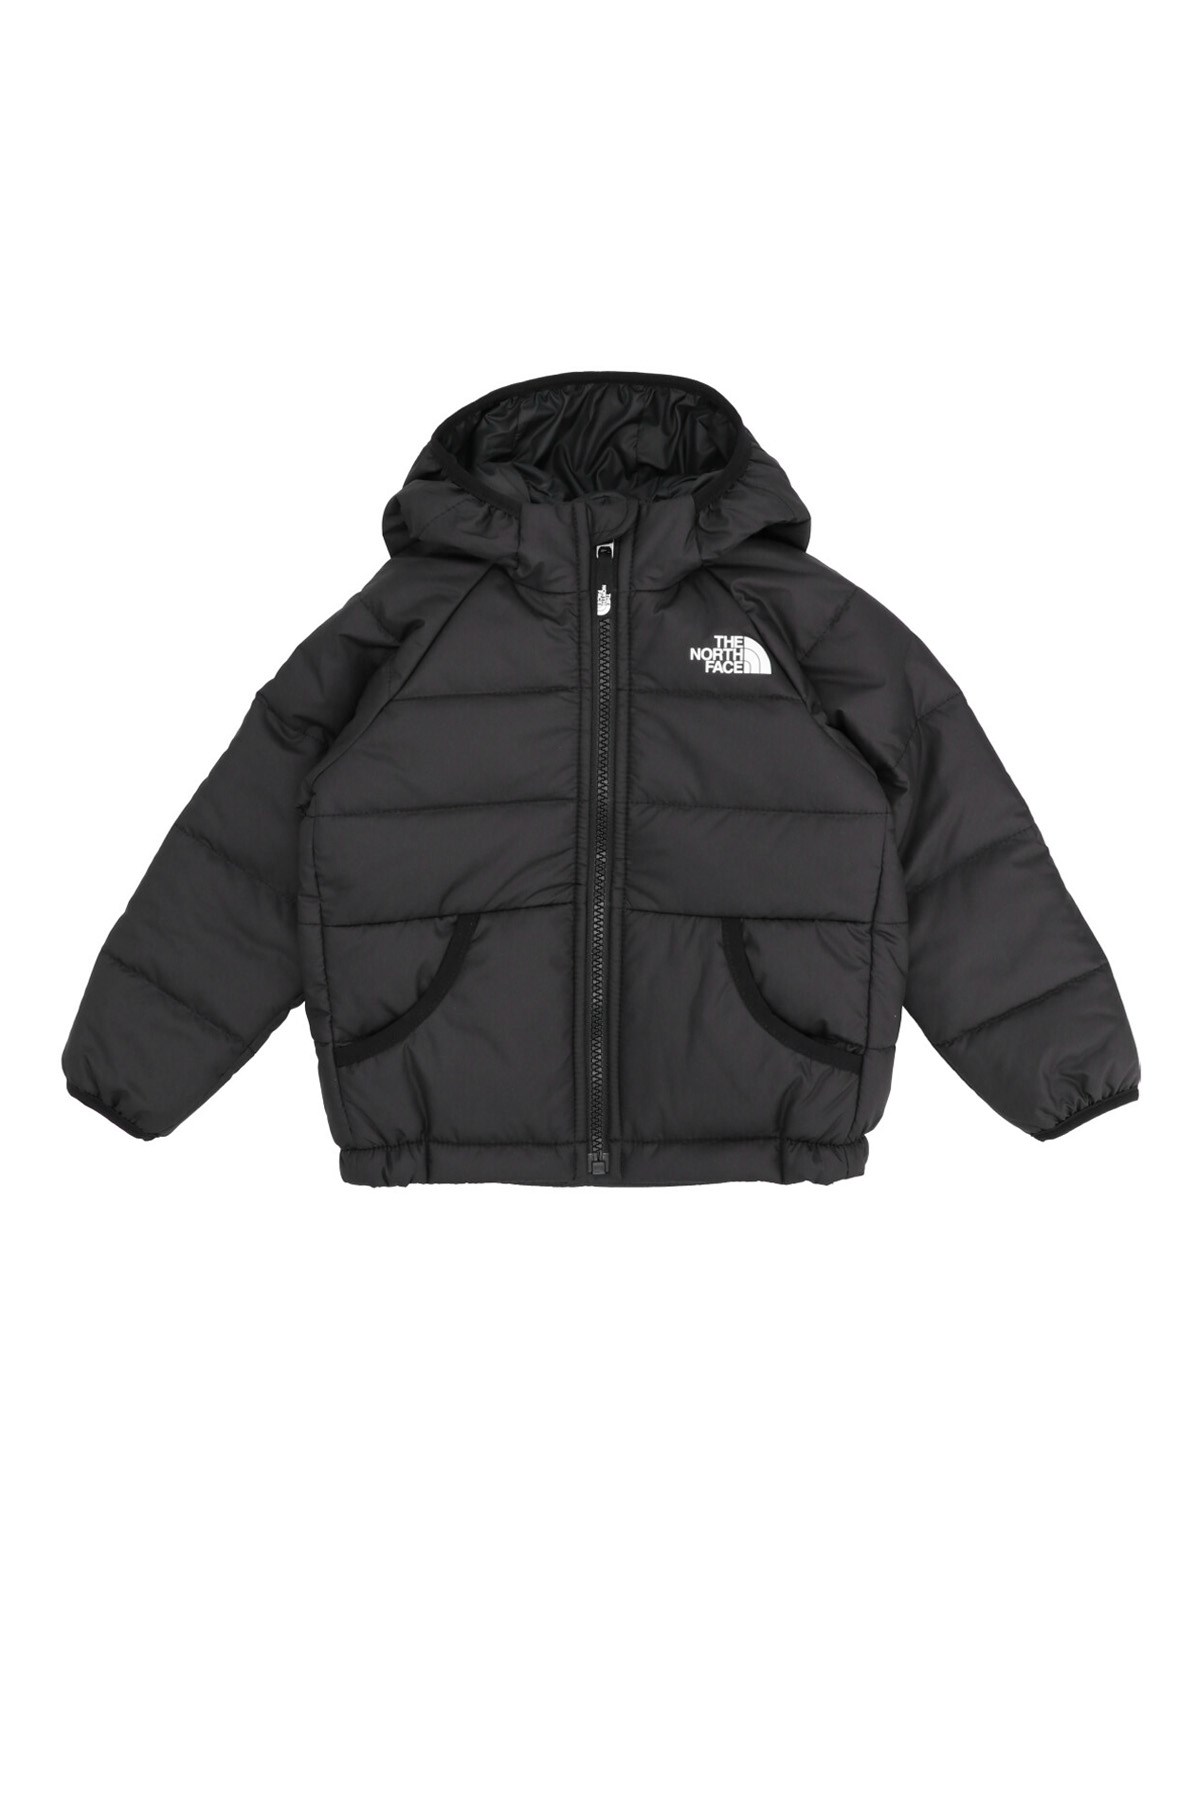 THE NORTH FACE Logo Reversible Down Jacket